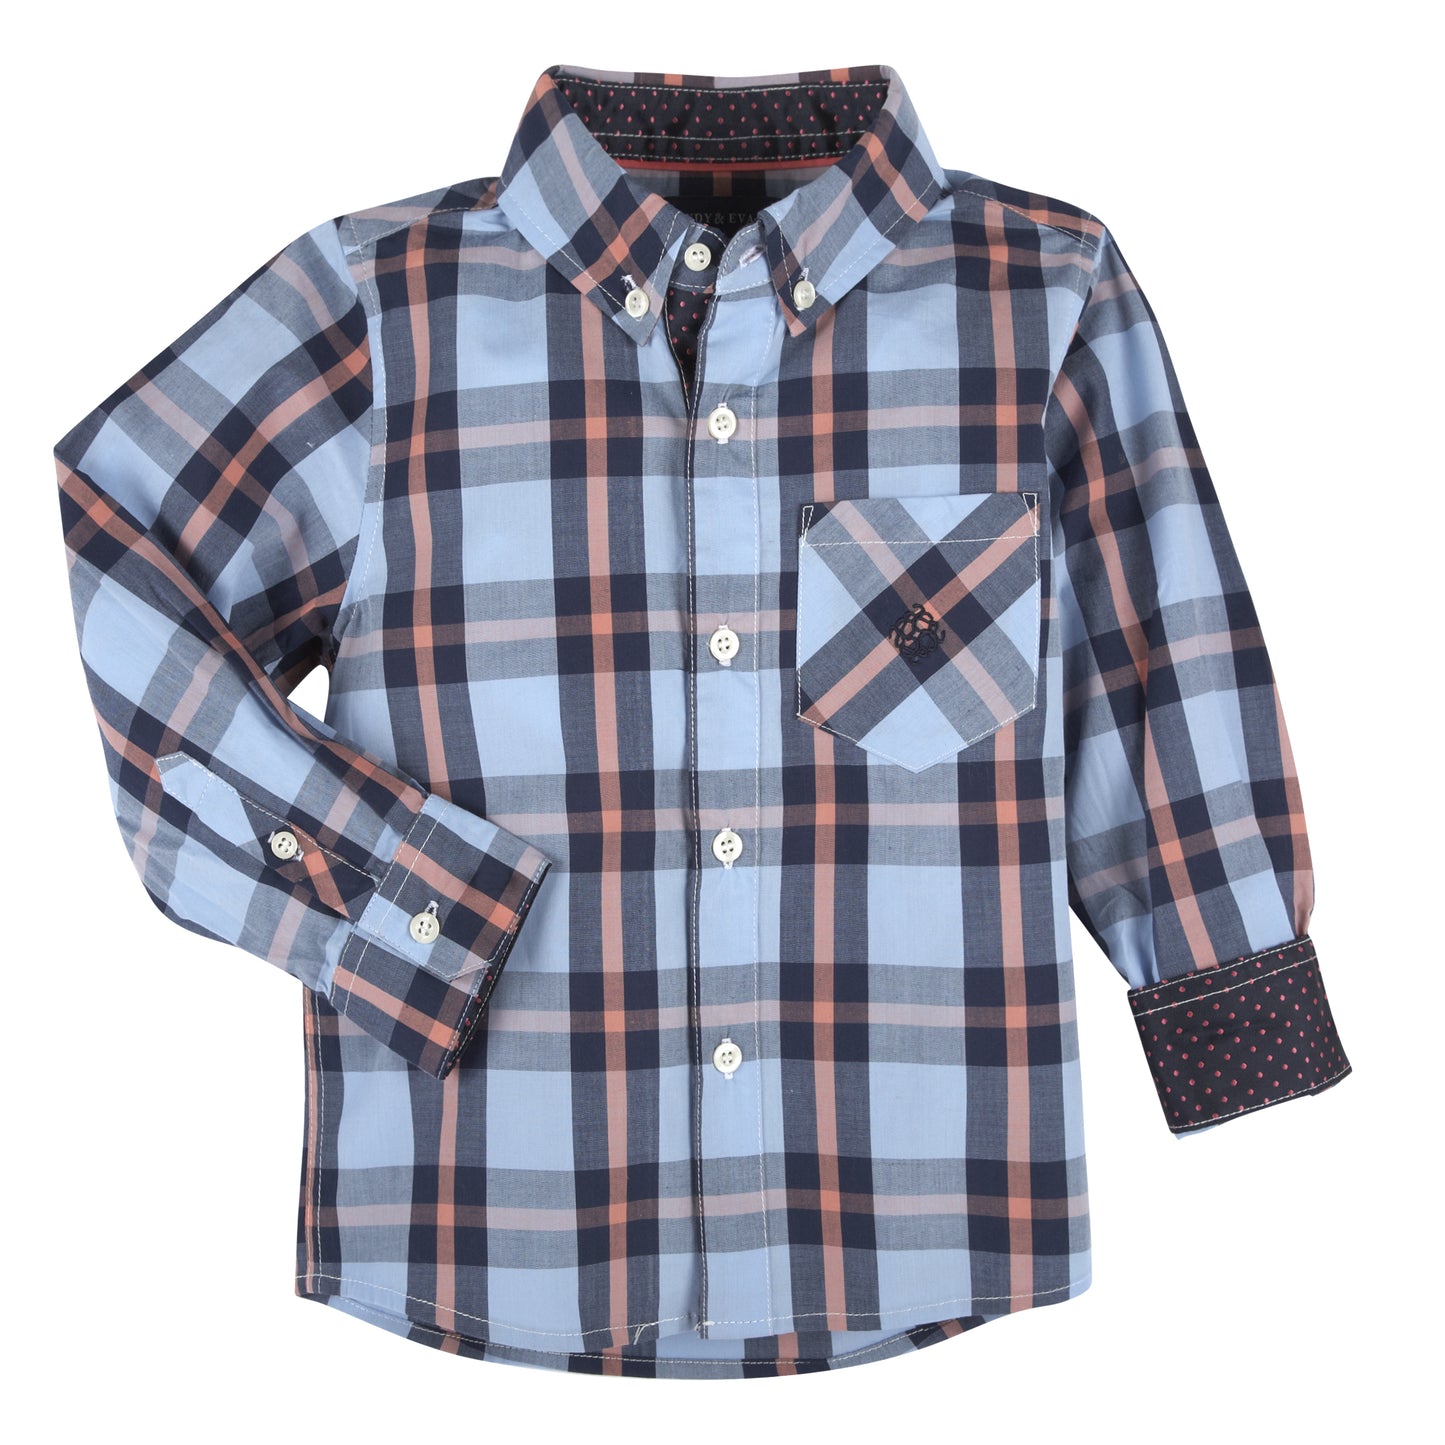 Andy & Evan Navy Plaid Button-up